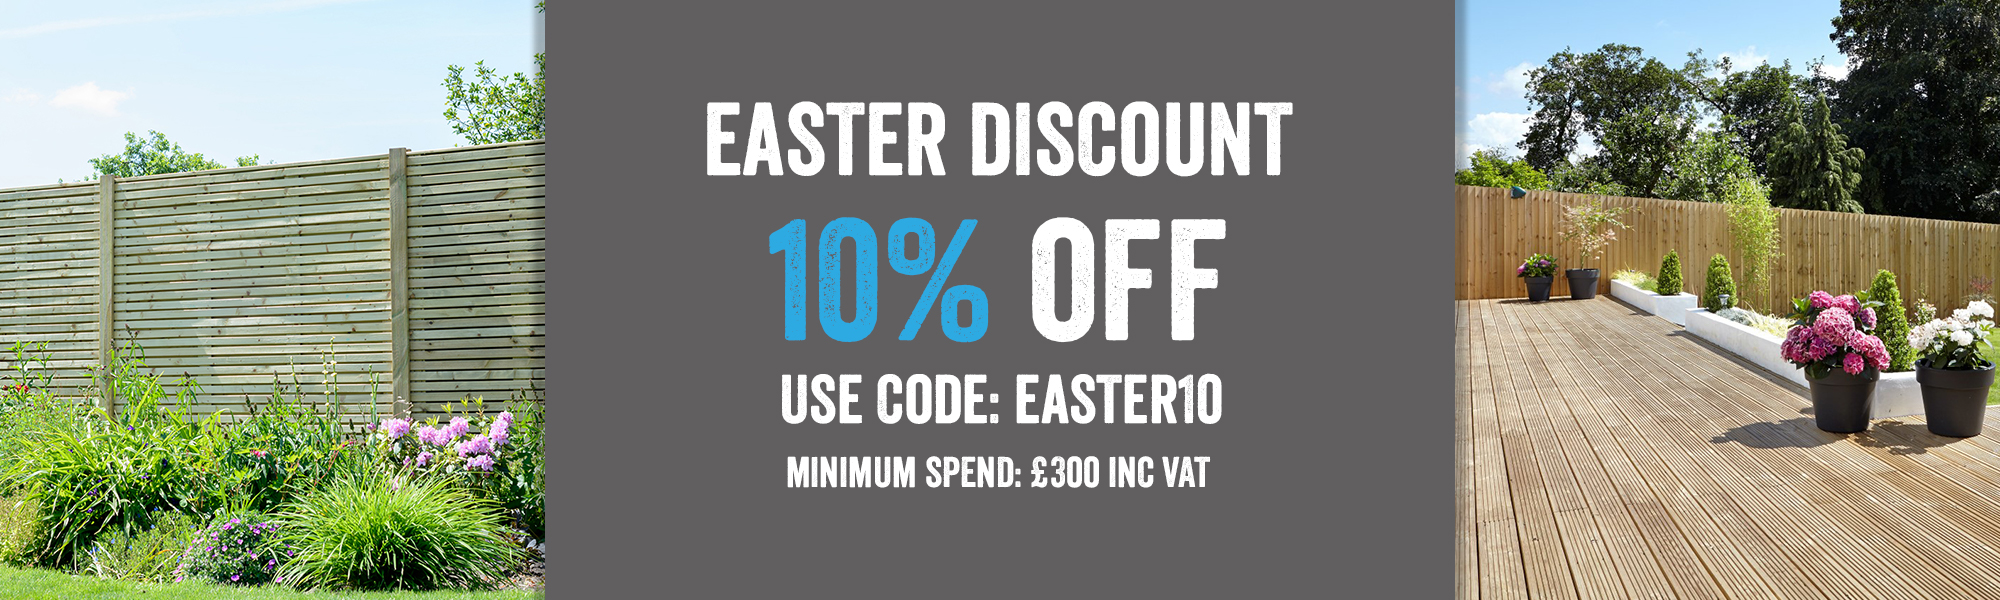 Easter Discount - EASTER10